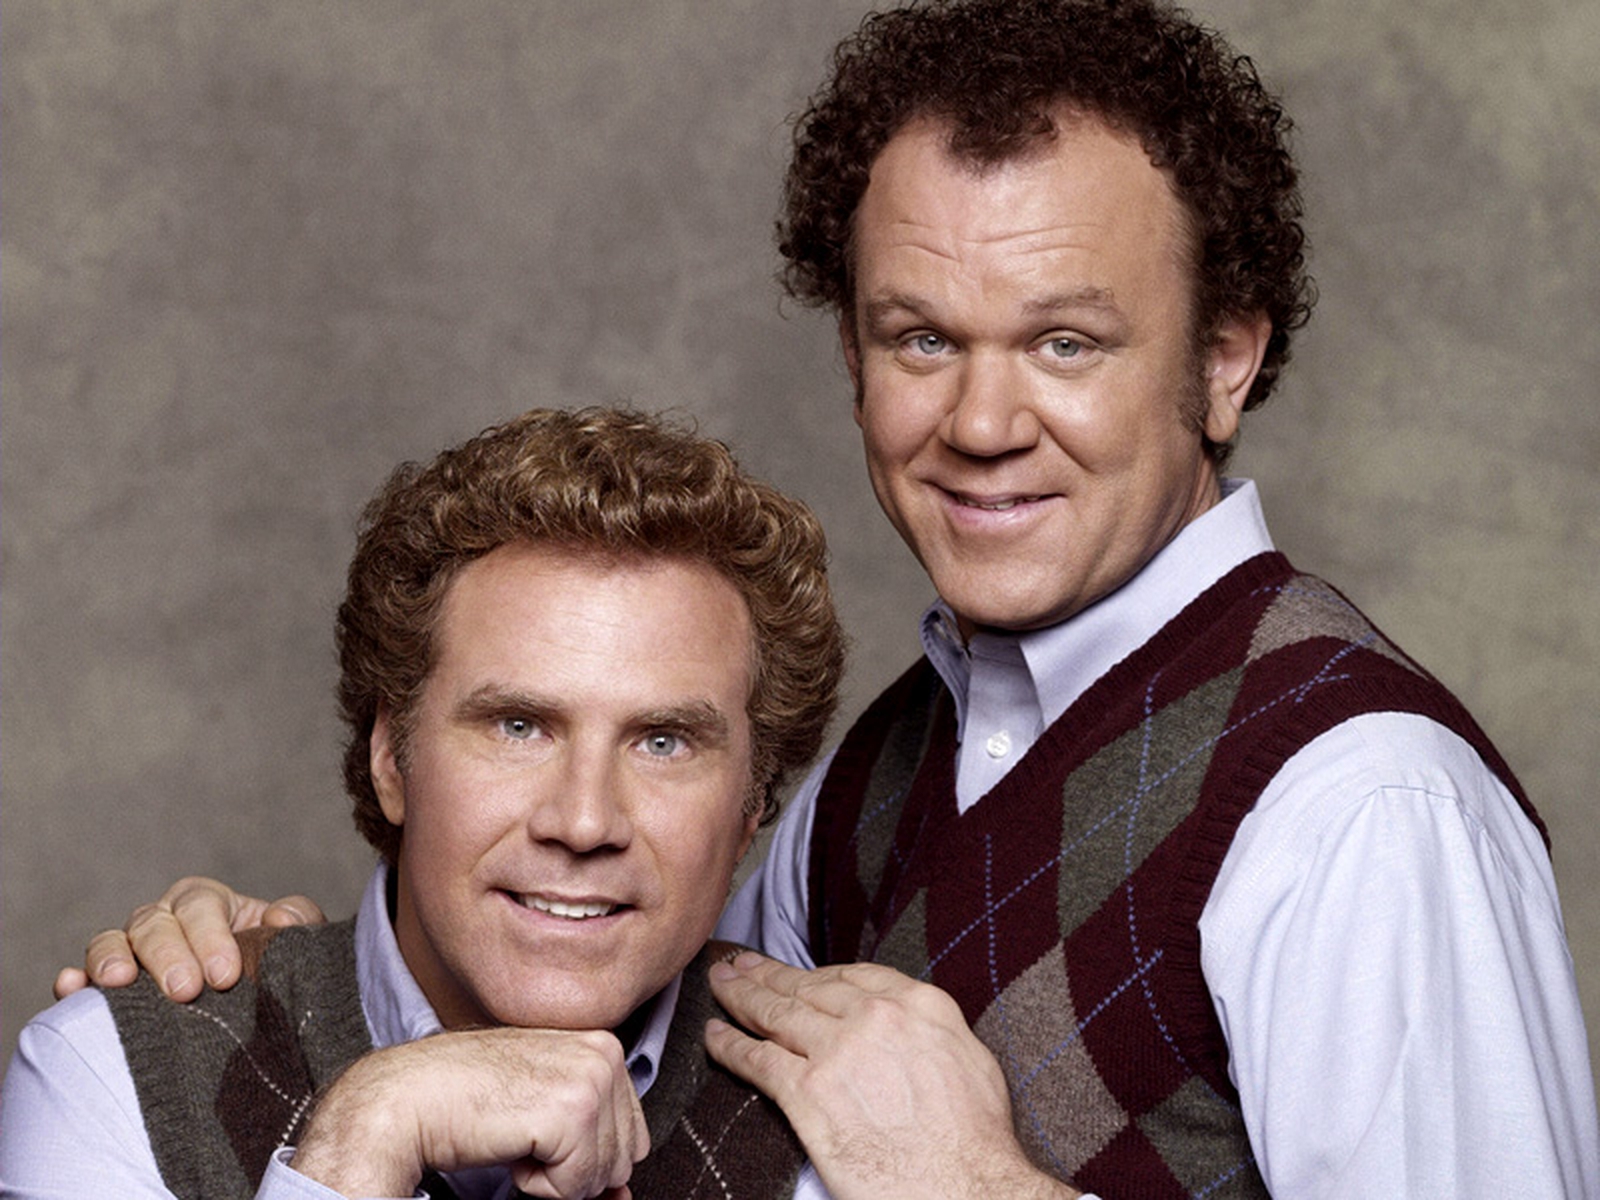 Azzsojuicy went store step brothers